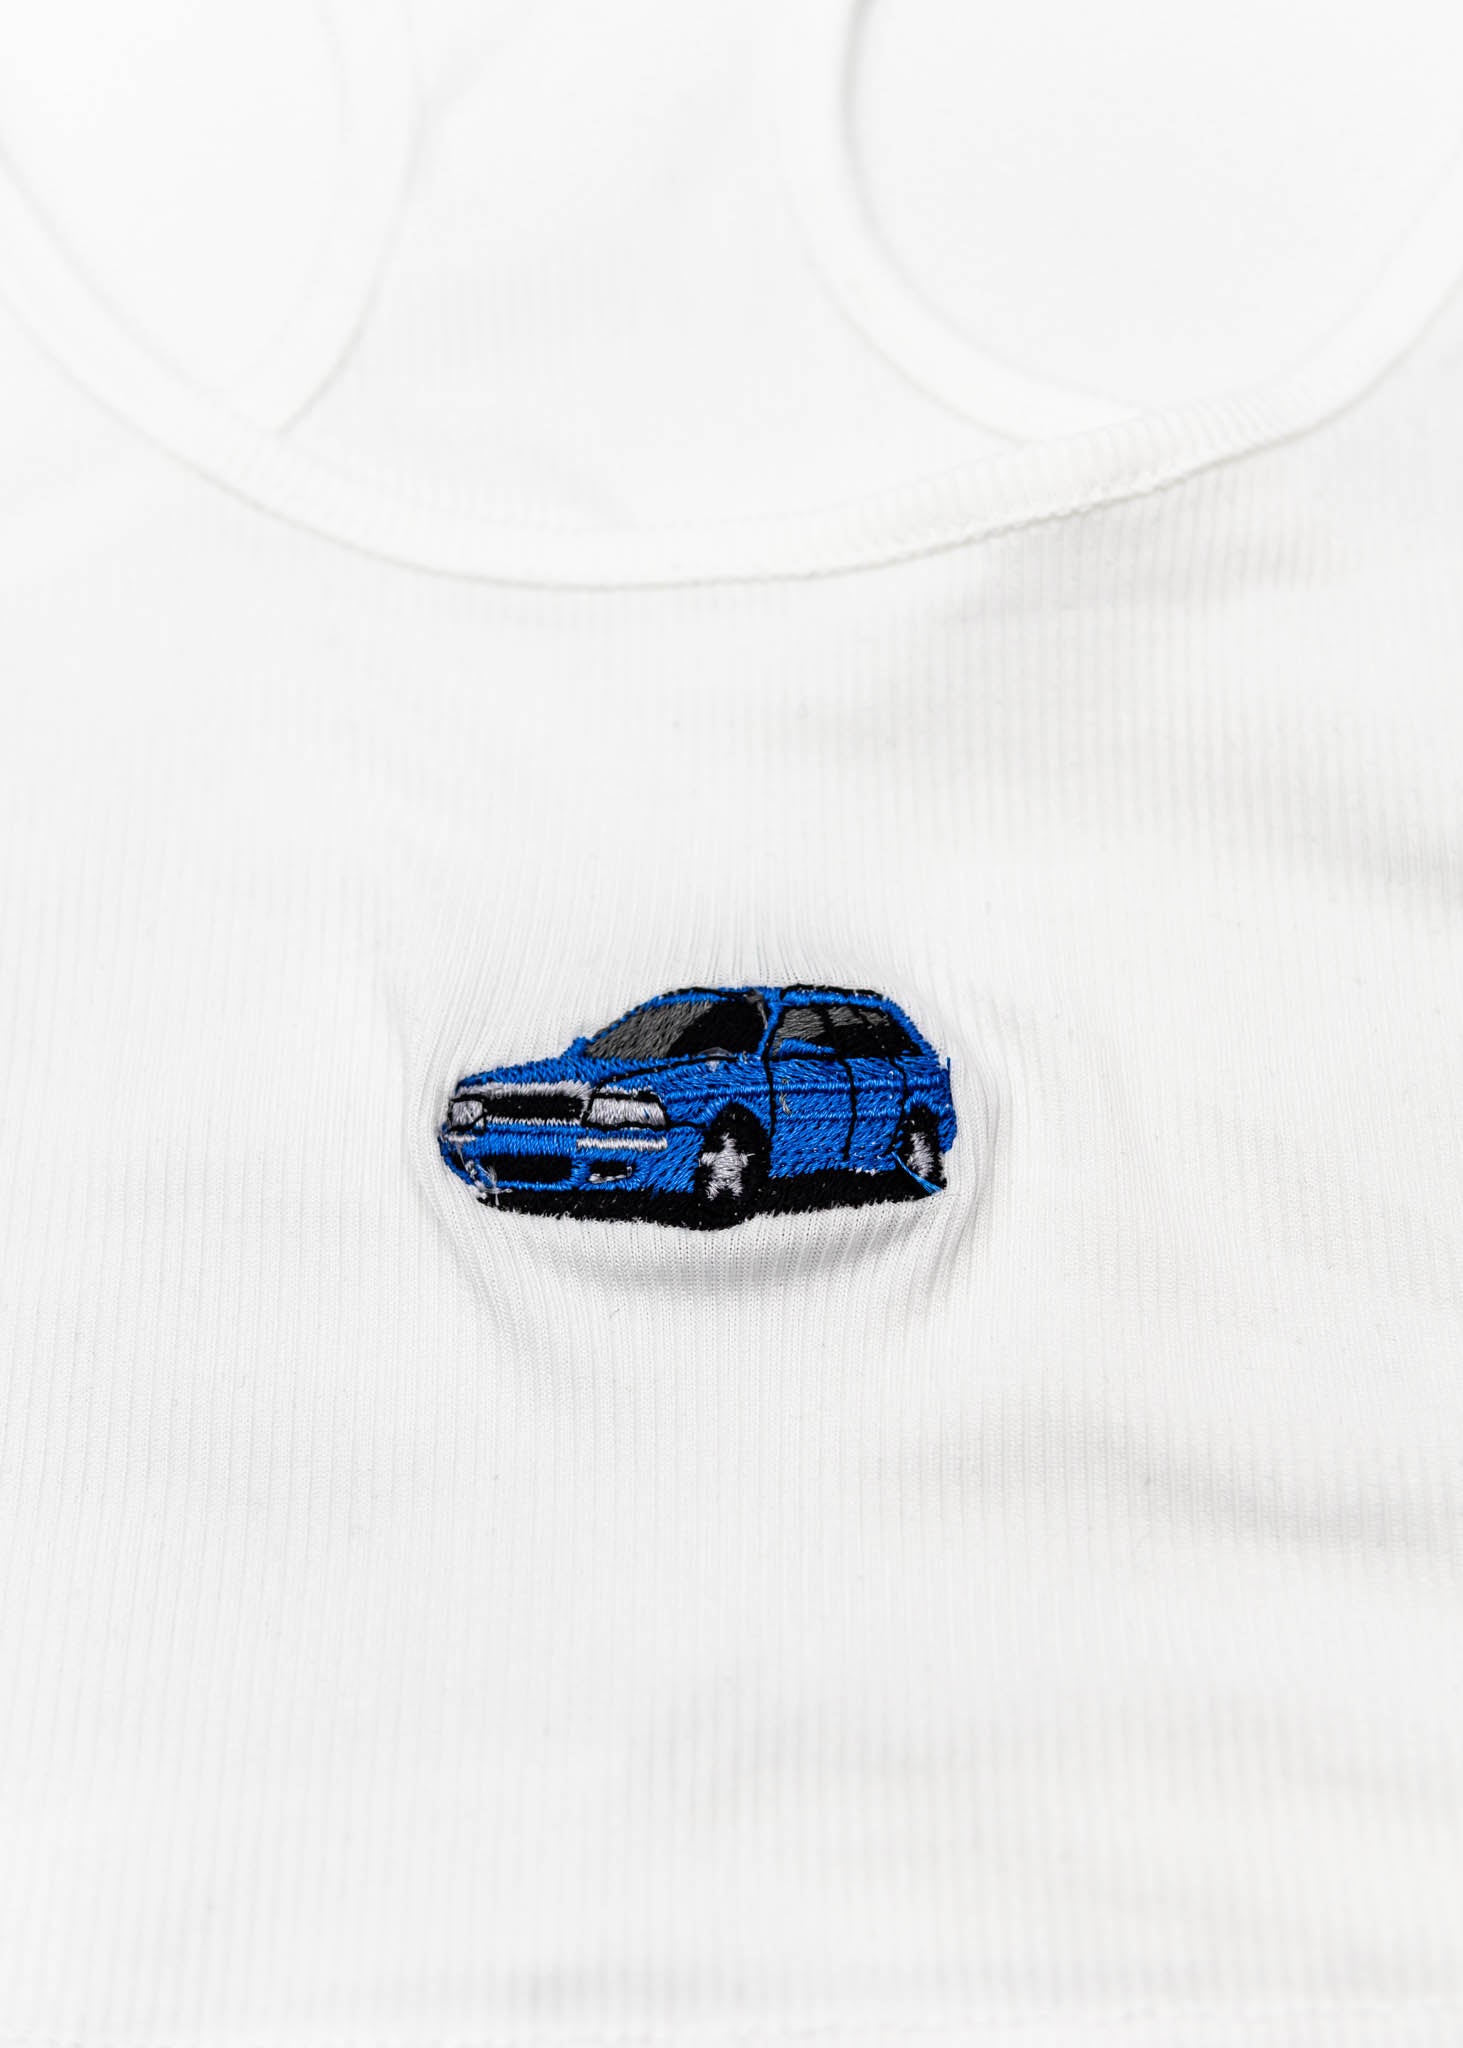 A white Audi crop top for women. Photo is a close up view of the top with an embroidered Nogaro Blue Audi 80 RS2 Avant made by Porsche. Fabric composition is polyester, and cotton. The material is stretchy, ribbed, and non-transparent. The style of this shirt is sleeveless, with a scoop neckline.